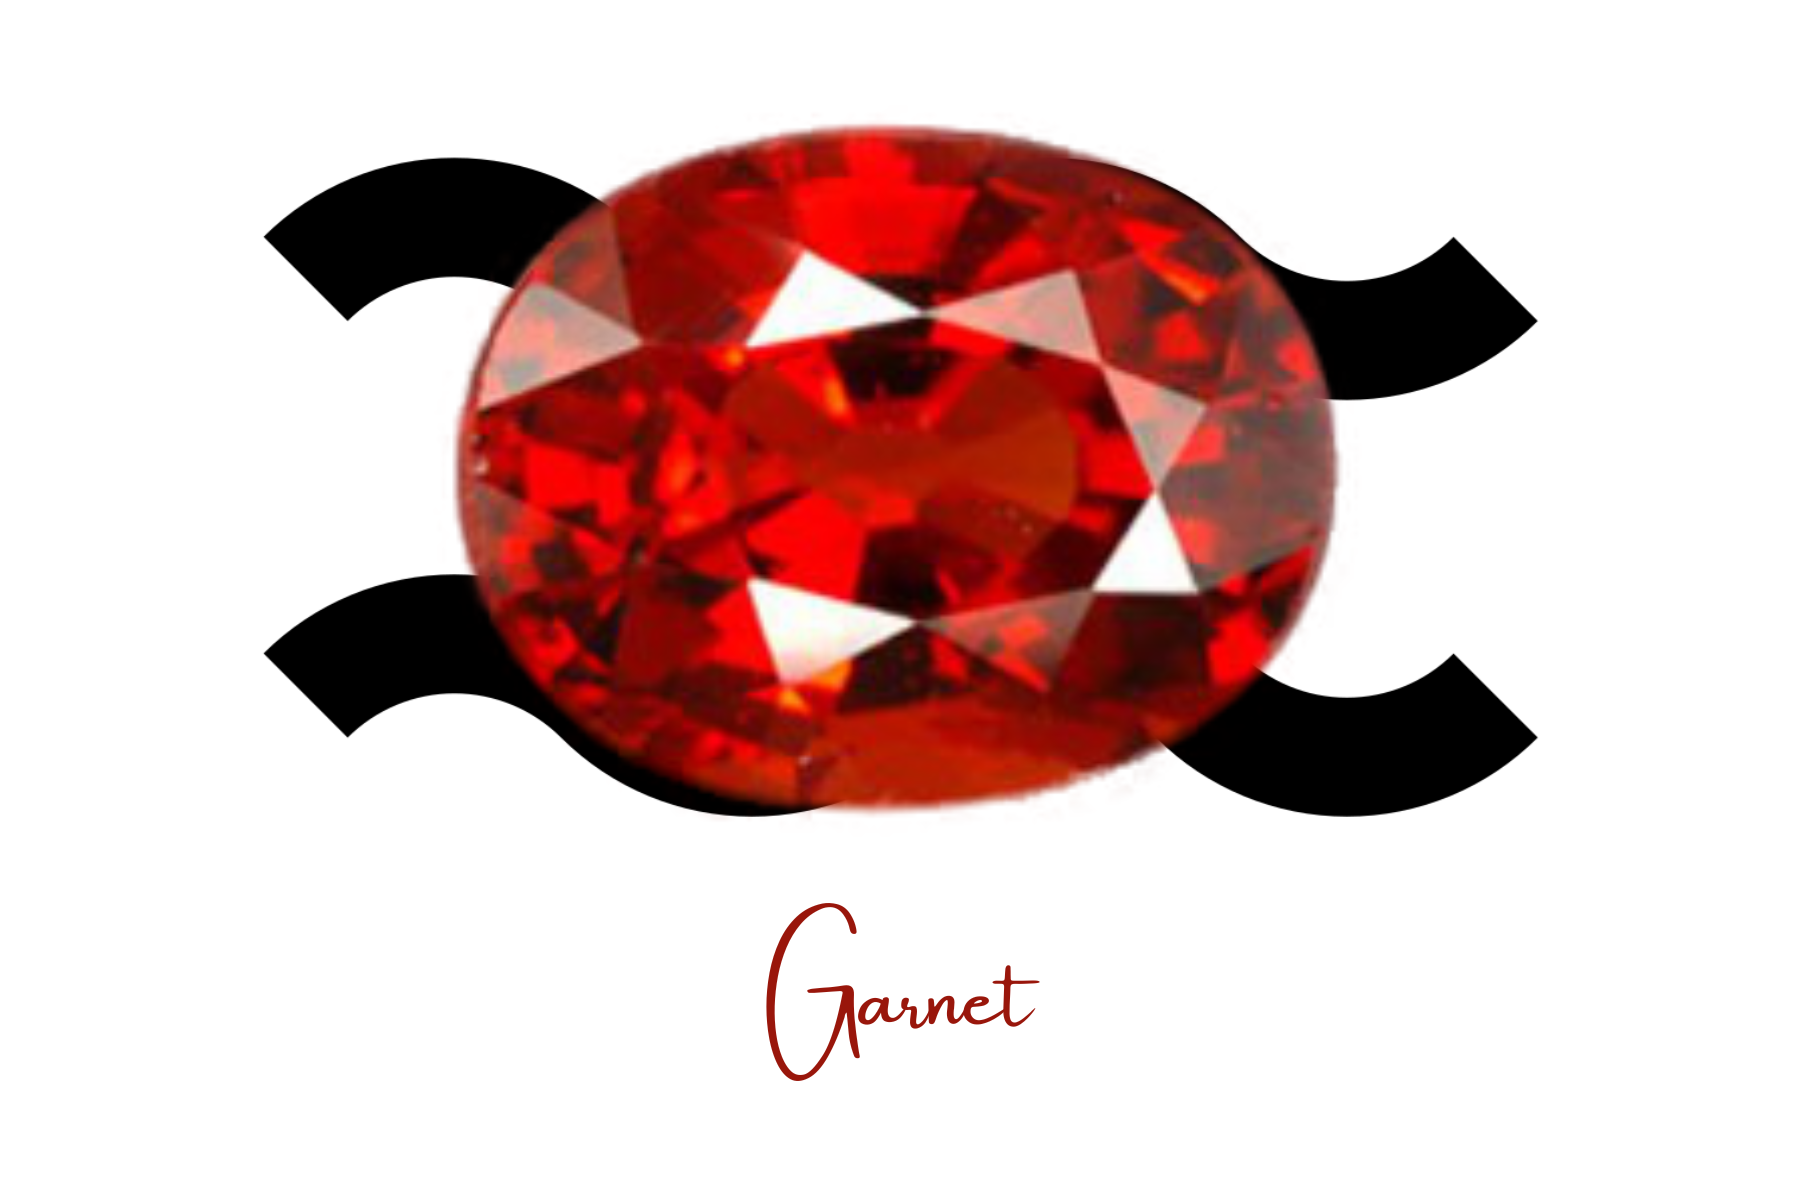 Oblong red garnet over the Aquarius sign